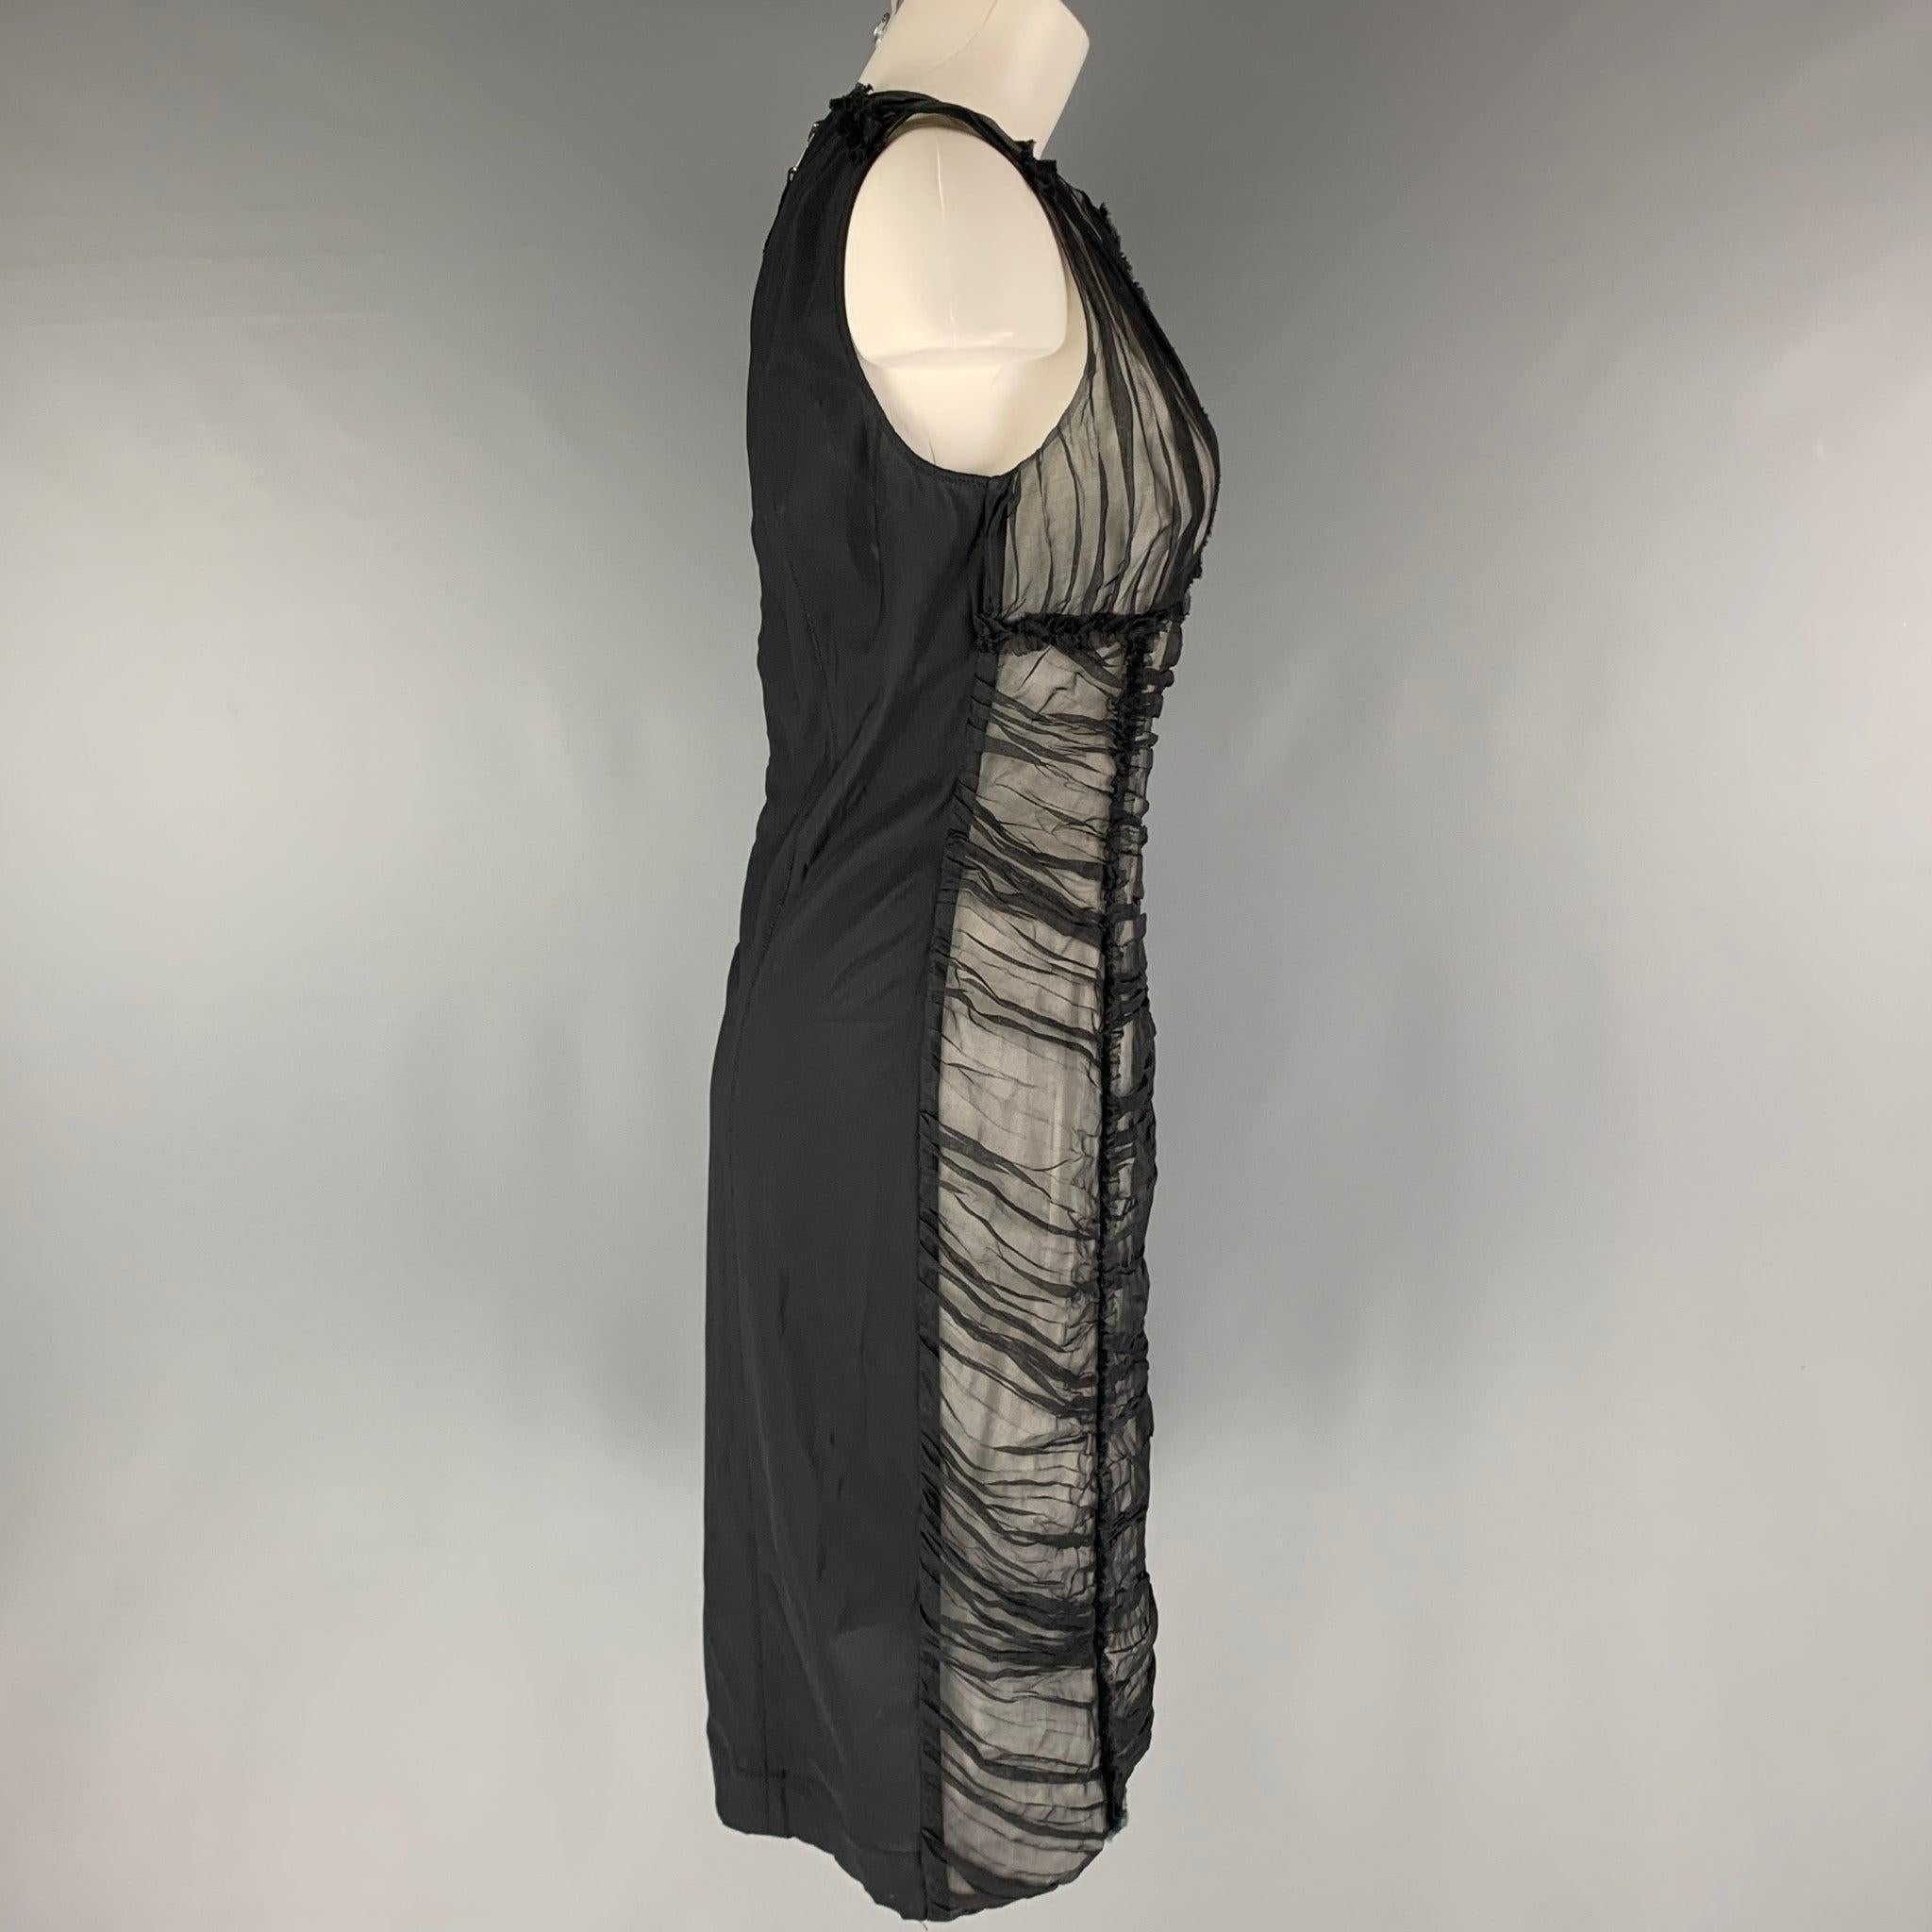 D&G by DOLCE & GABBANA dress comes in a black nylon see through woven material with a front white woven lining featuring a ruched detail, and zip up closure. Made in Italy.Very Good Pre-Owned Condition. Moderate marks and signs of wear. 

Marked: 